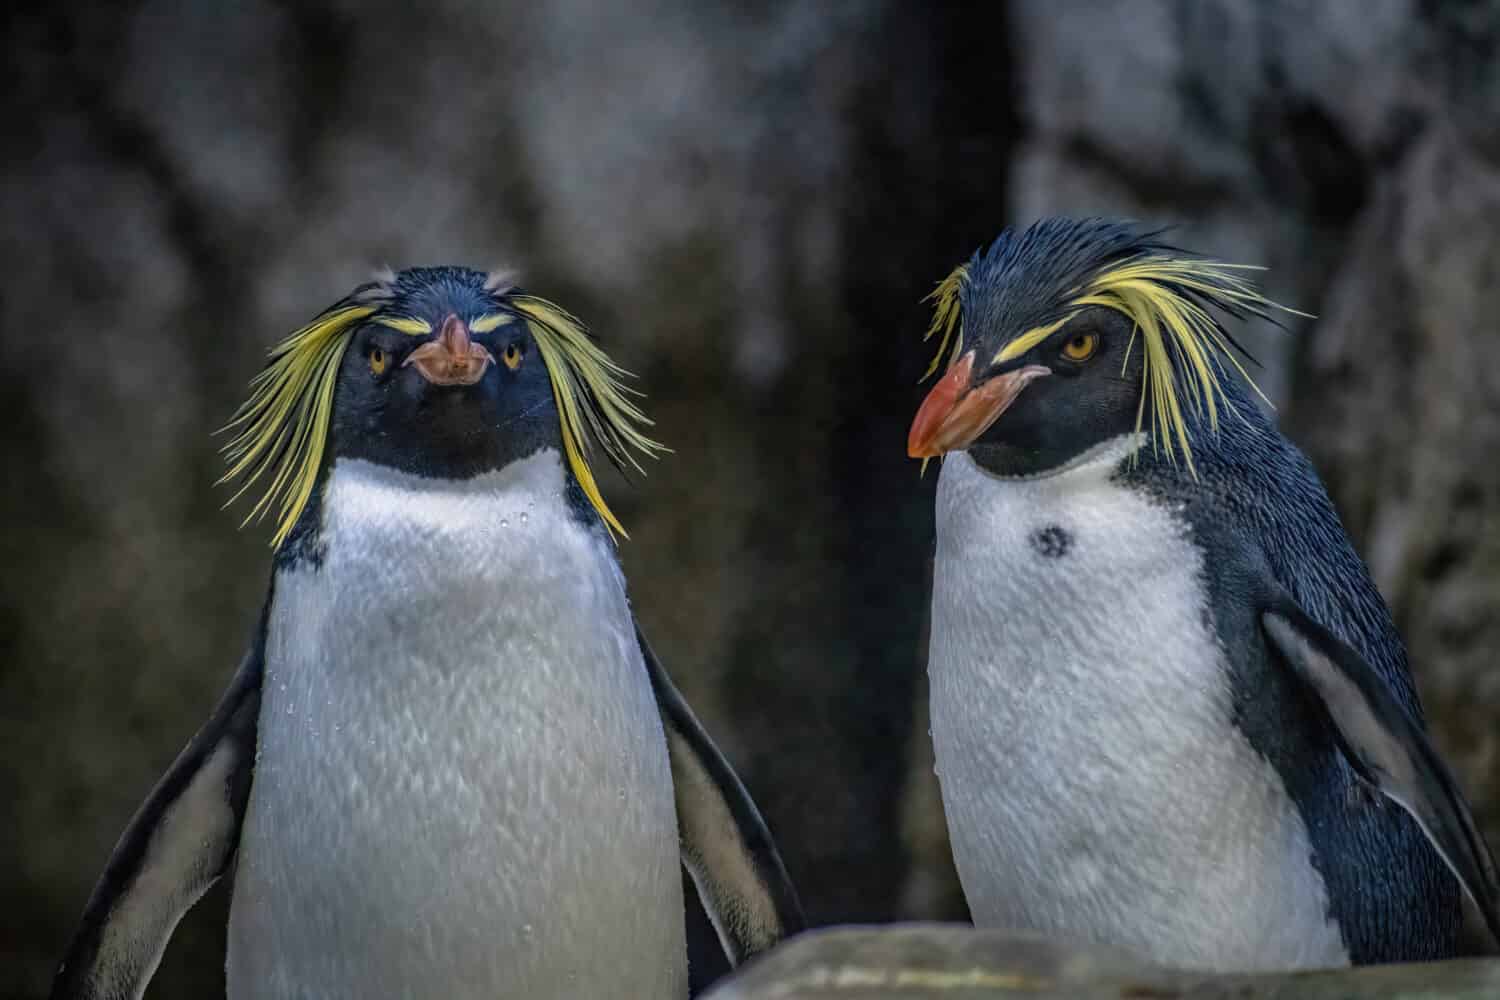 2 NORTHERN ROCKHOPPER PENGUINS STANDING TOGETHER WITH WATER DROPLETS ON THERE COATS IN FRONT OF A ROCKY WALL